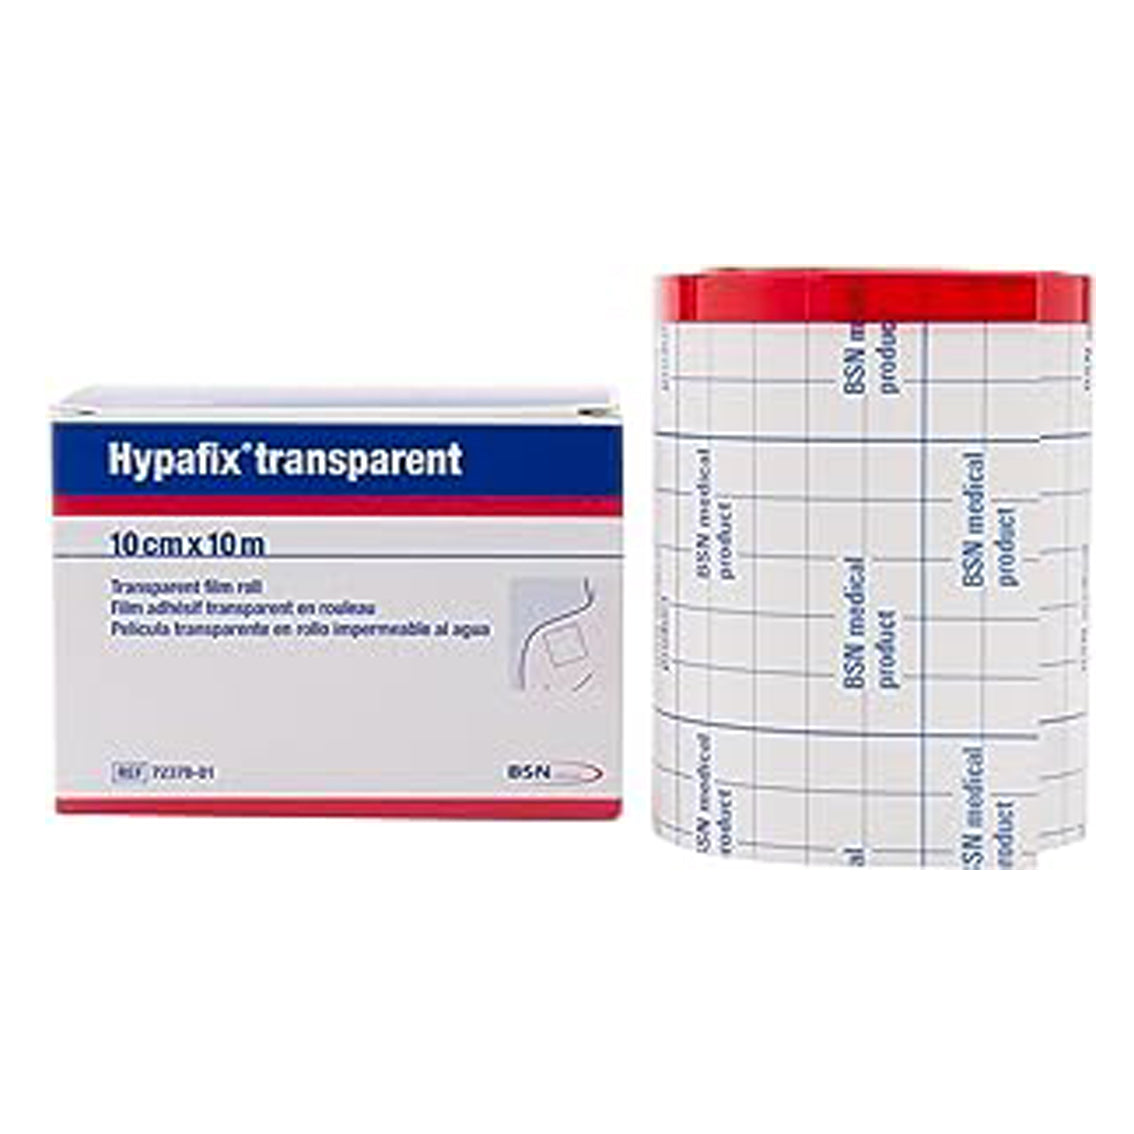 Hypafix® Transparent Dressing Retention Tape, 4 Inch X 11 Yard, Sold As 12/Each Bsn 7237801